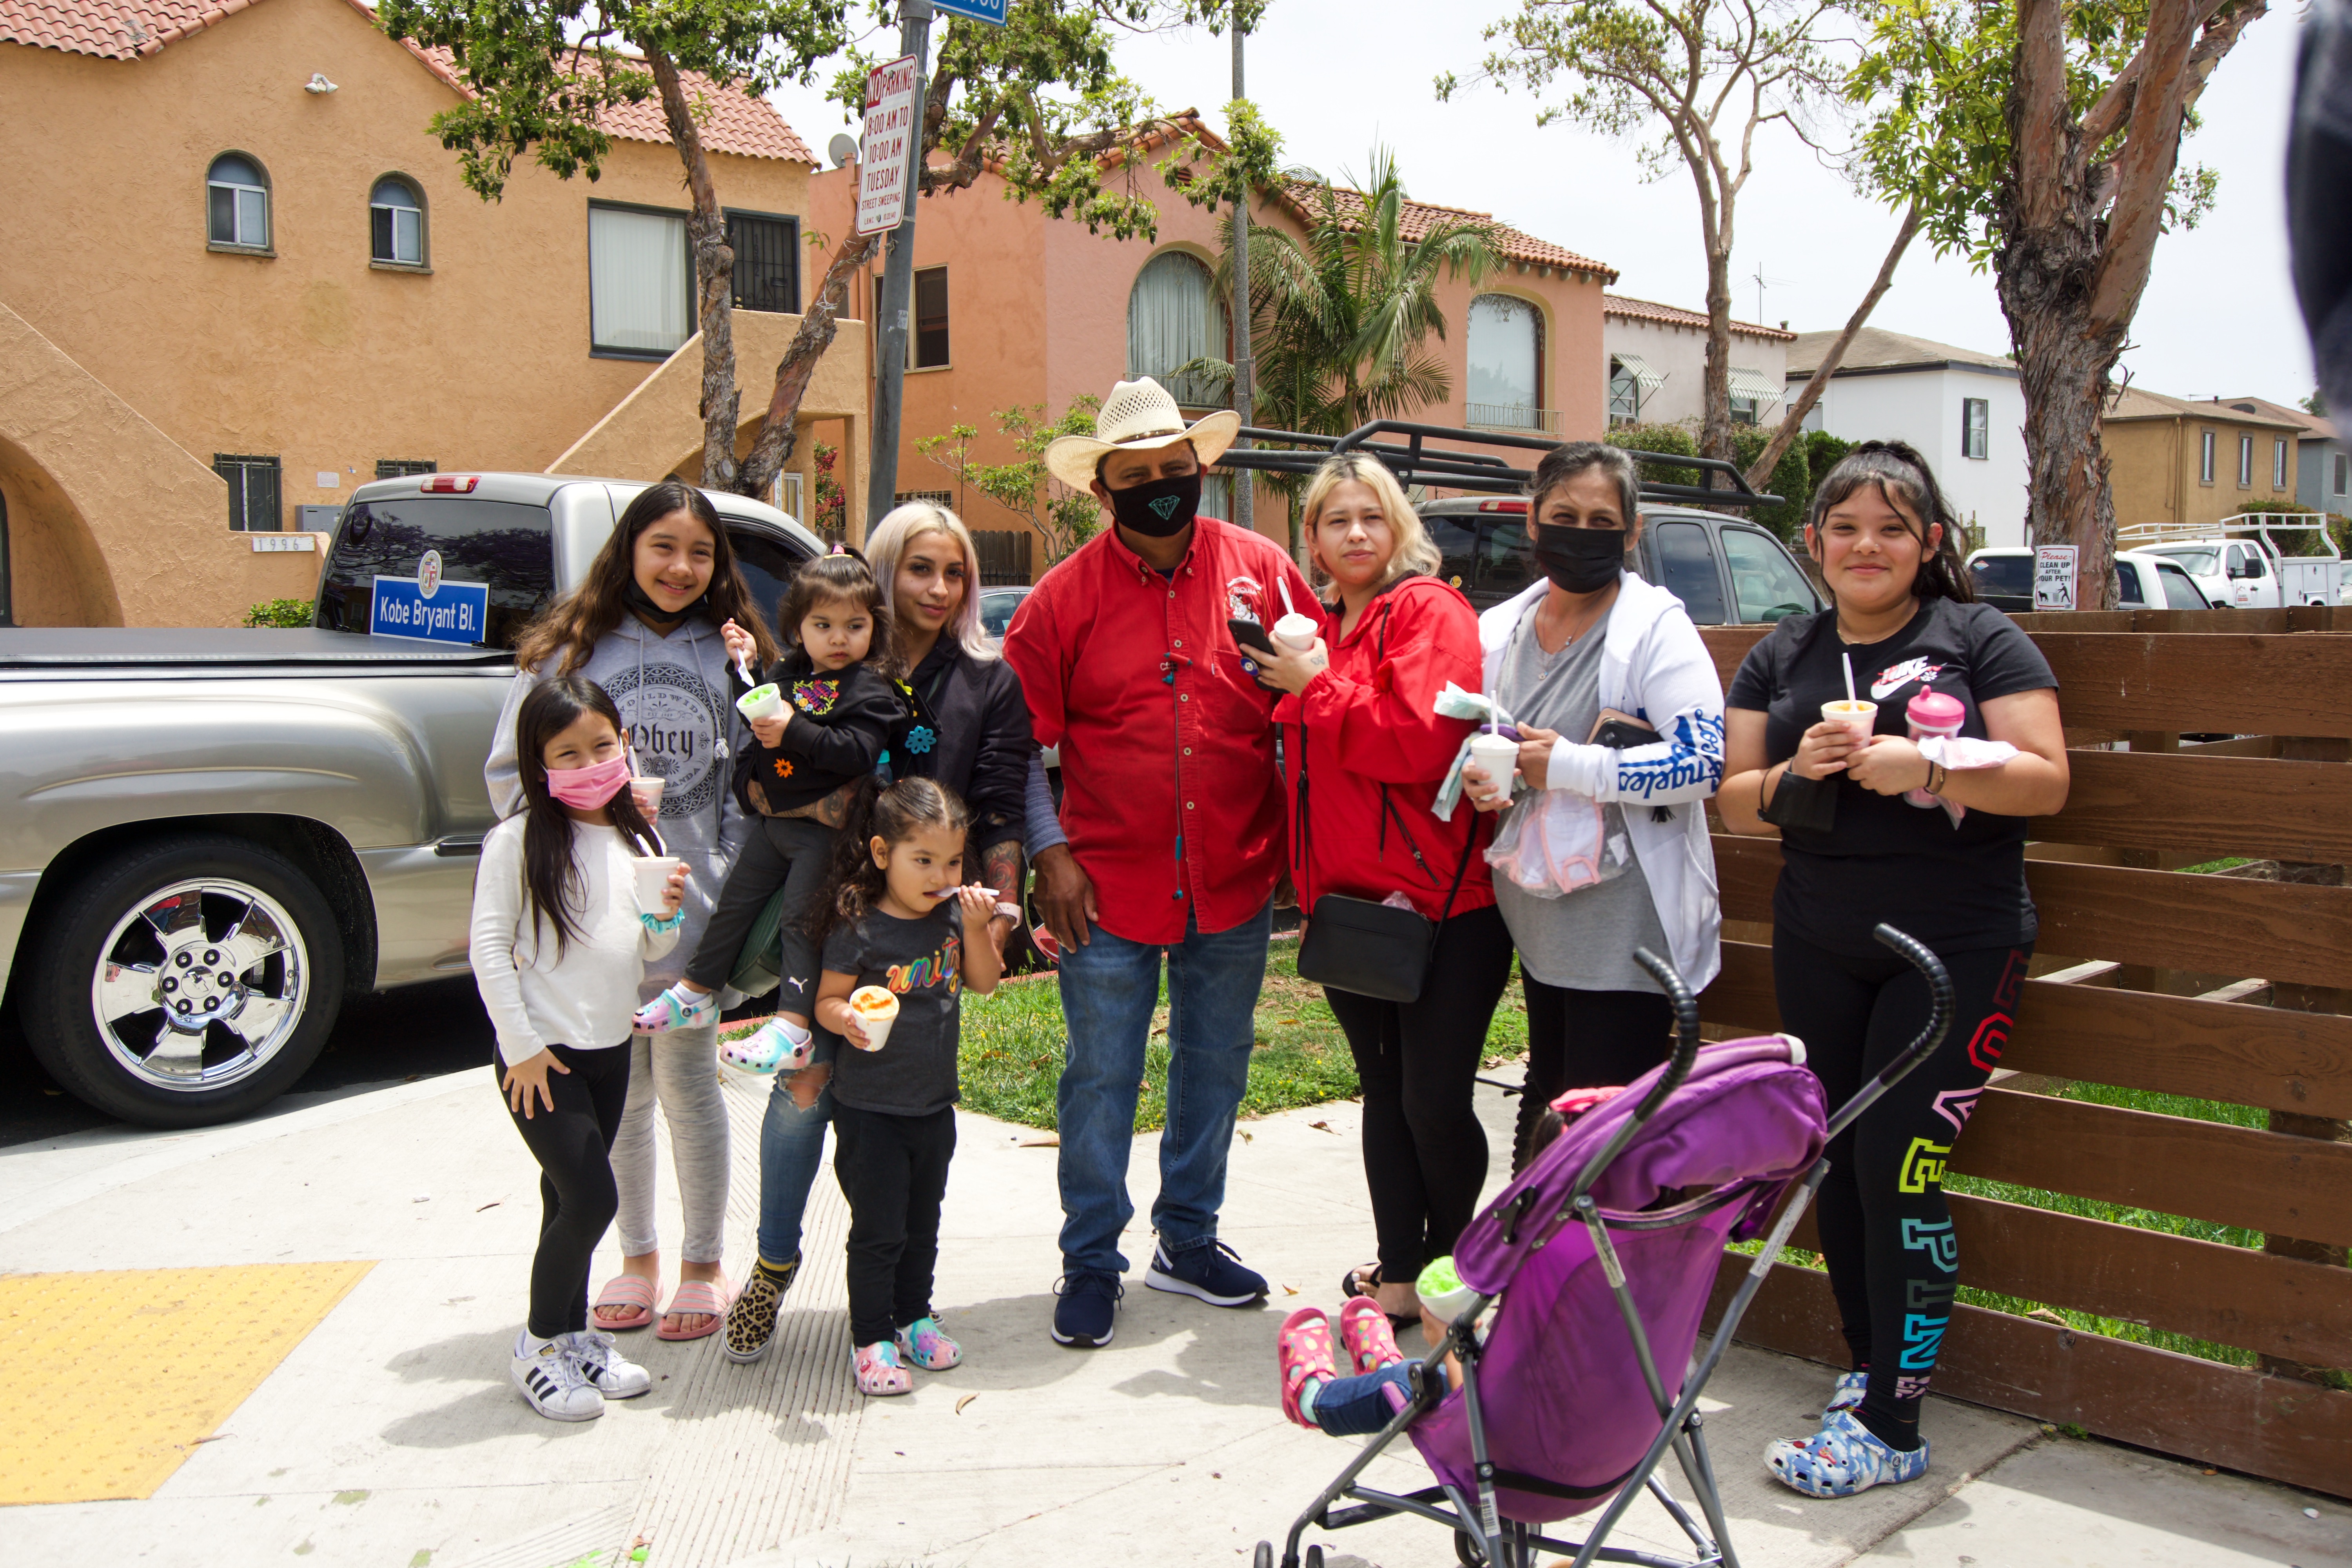 Irma Rodarte and her family who have been long time customer of Eliu Ramirez showed up on Saturday to show their support for the vendor.